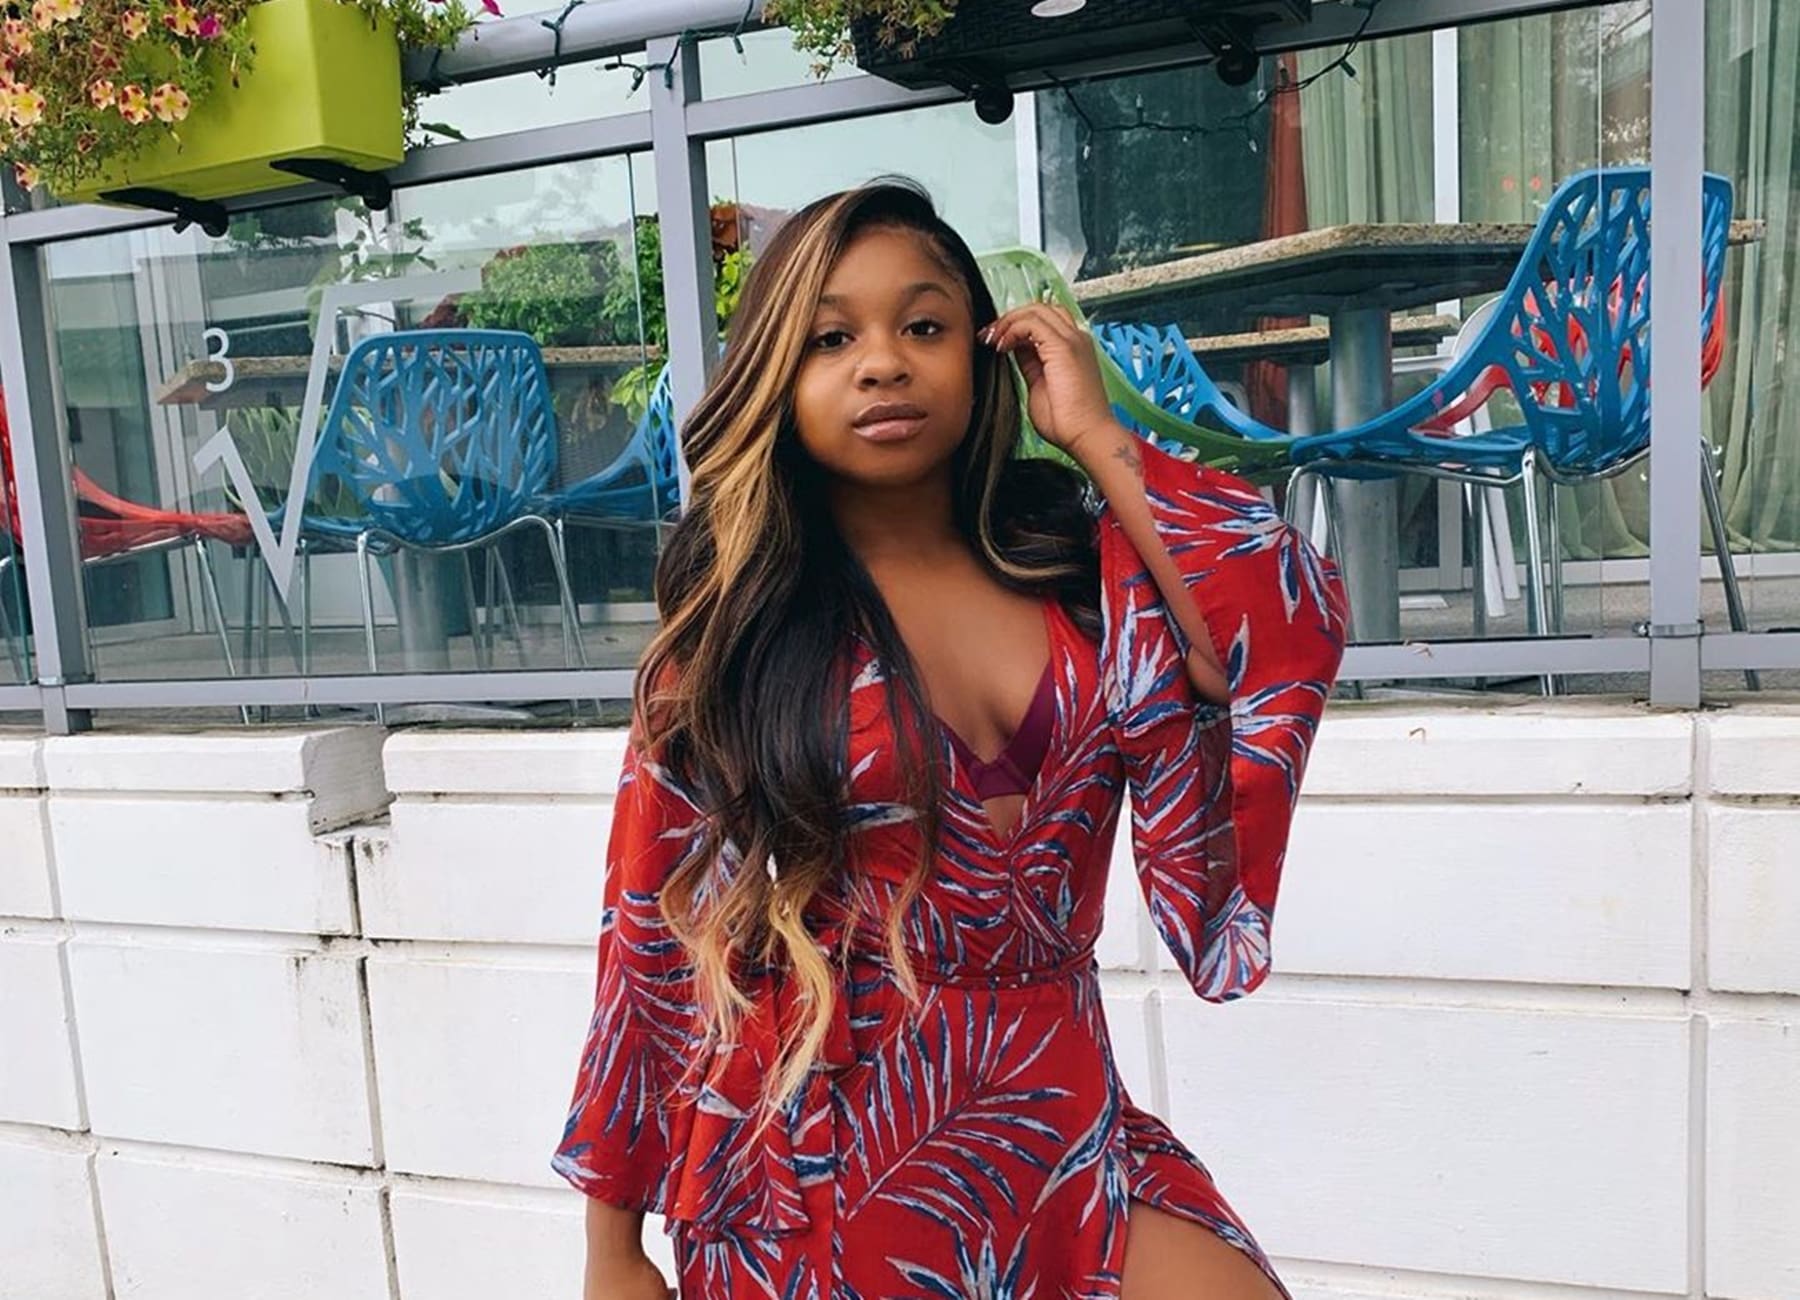 Toya Johnson's Daughter, Reginae Carter Shows Off Her Curves In A Skin-Tight Outfit And Fans Notice That She Lost Weight